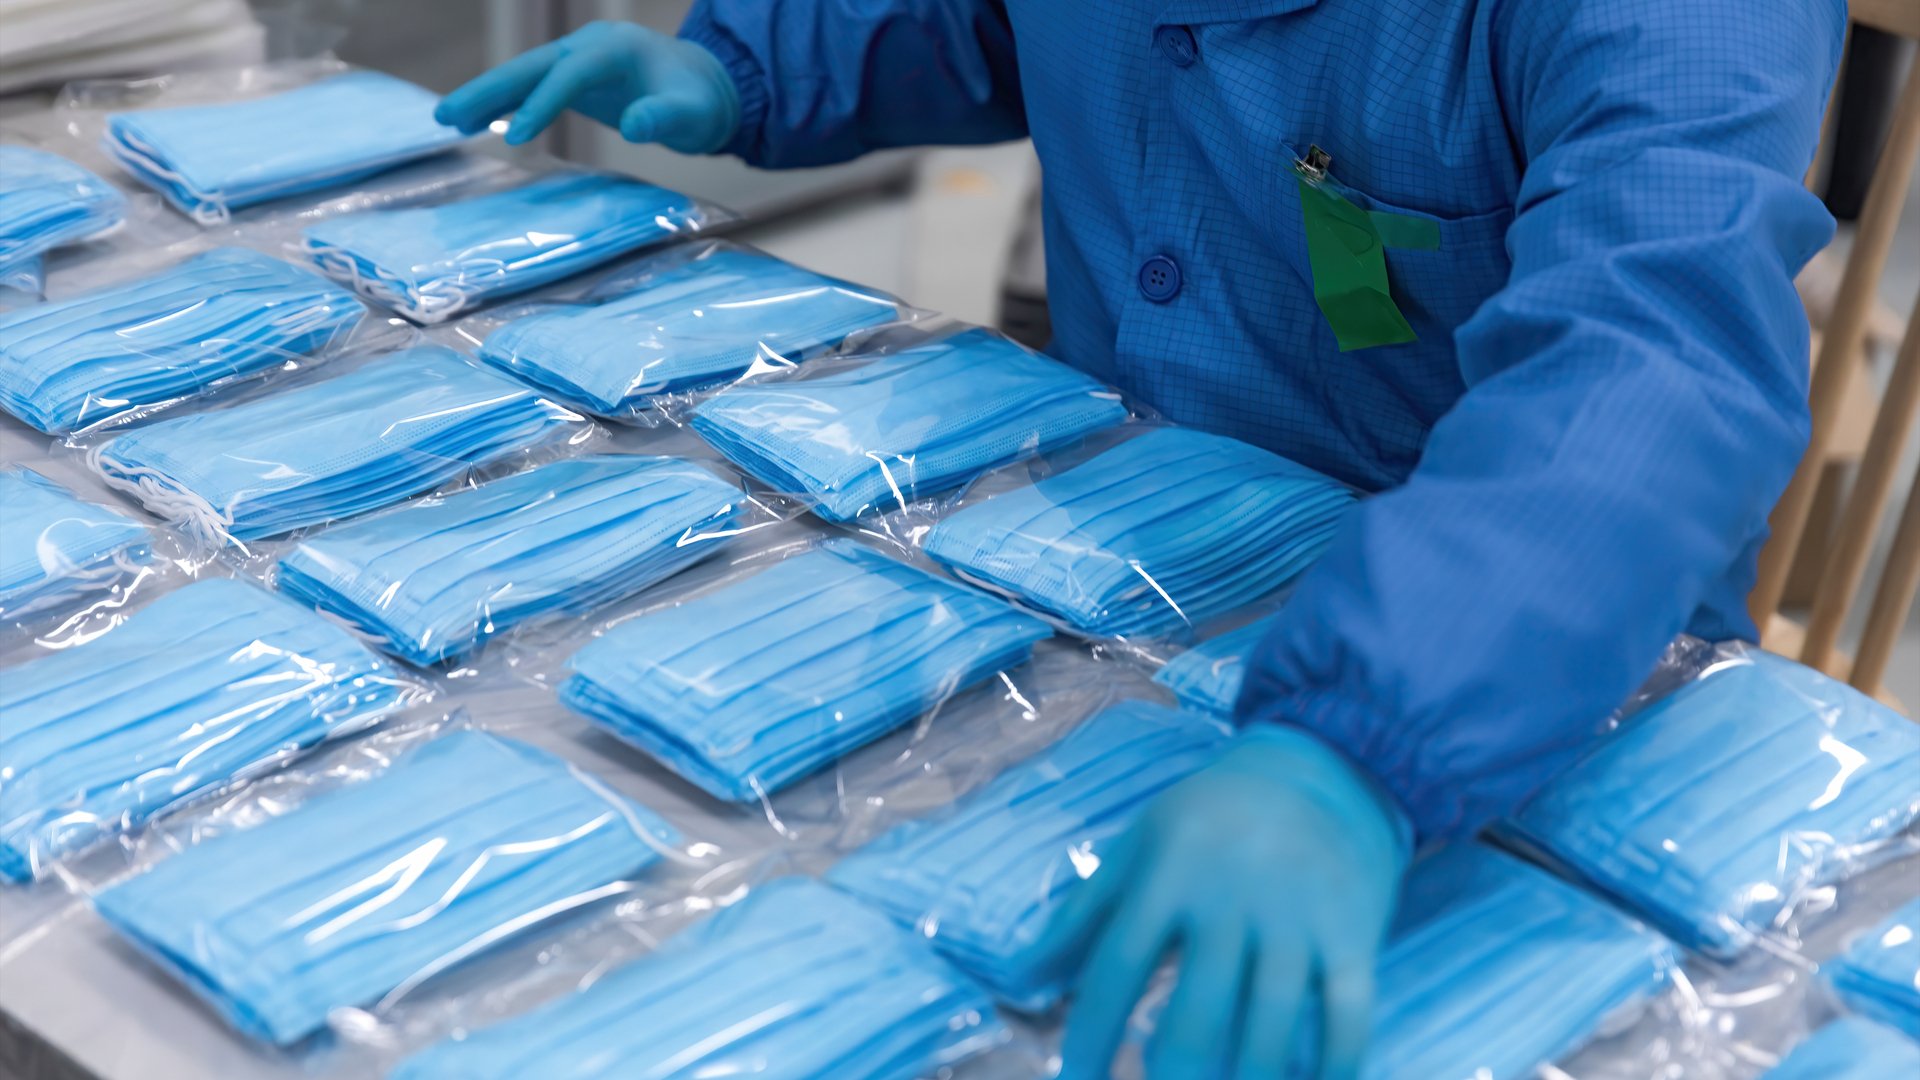 A person in blue hospital uniform sorts through packages of face masks.